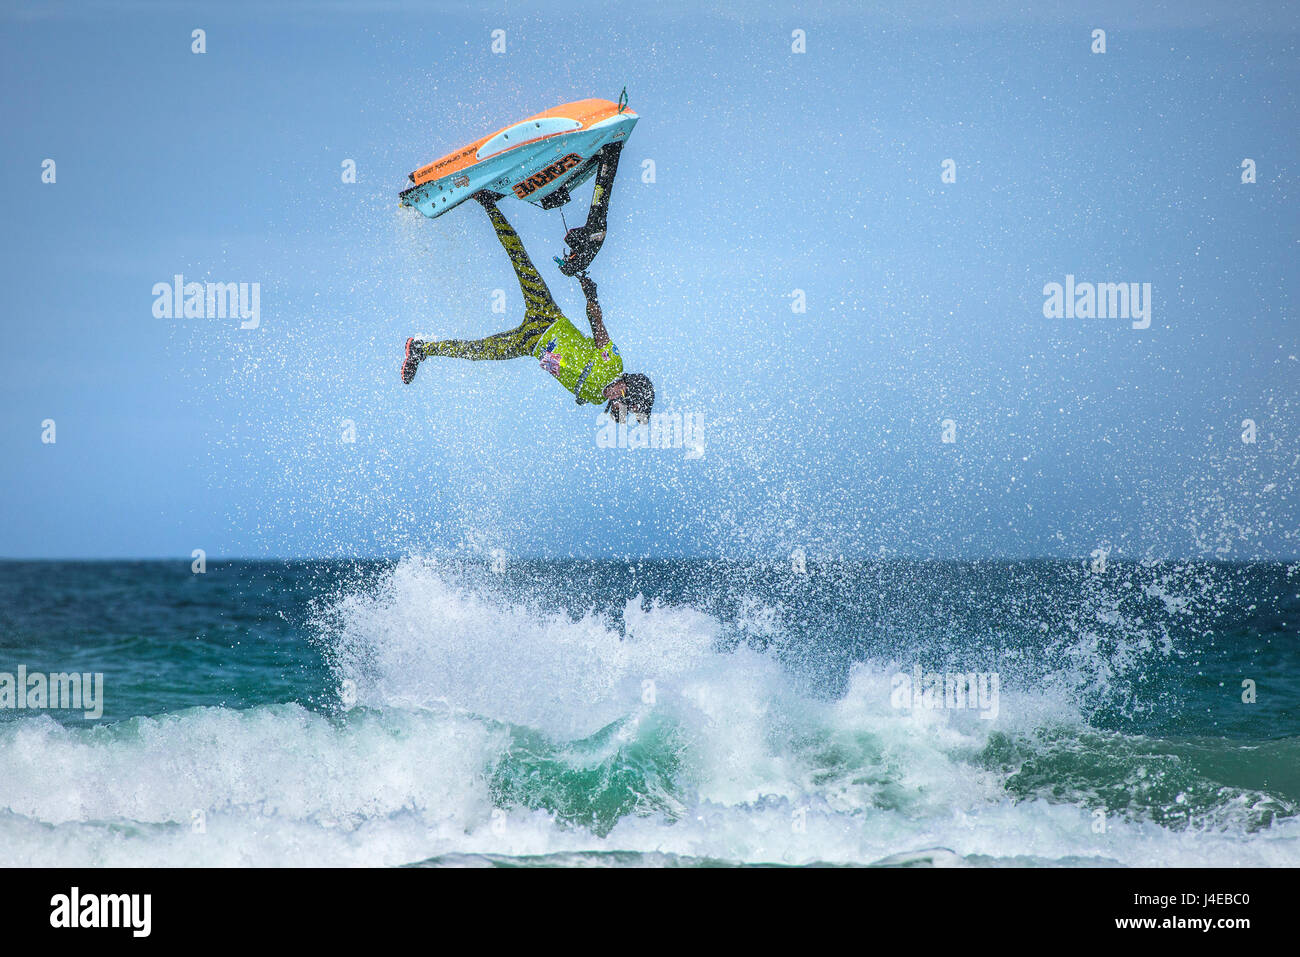 Fistral Beach; Newquay, Cornwall. 13th May, 2017. British jetski star Dan Foy performs an elegant gravity defying aerial display as he competes in the IFWA UK. European and IFWA World Championships taking place at Fistral Beach in Newquay, Cornwall.  Photographer: Gordon Scammell/Alamy Live News. Stock Photo